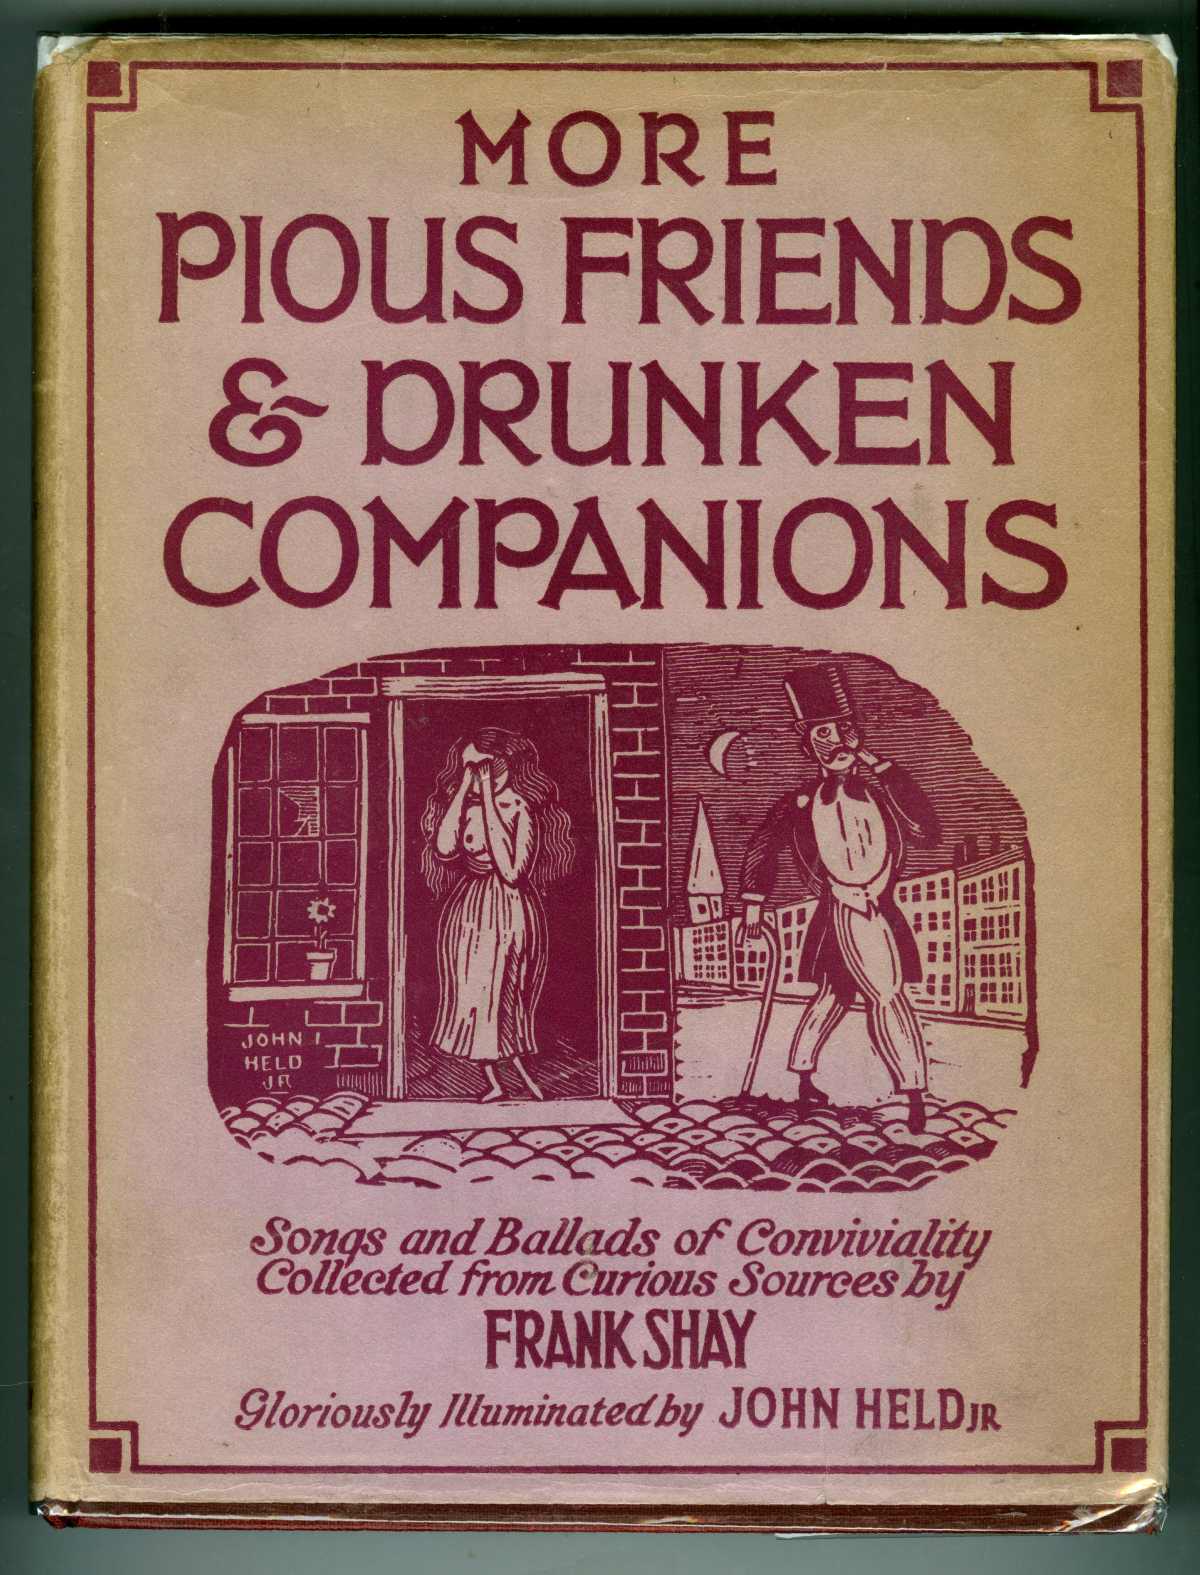 More Pious Friends and Drunken Companions by Frank Shay